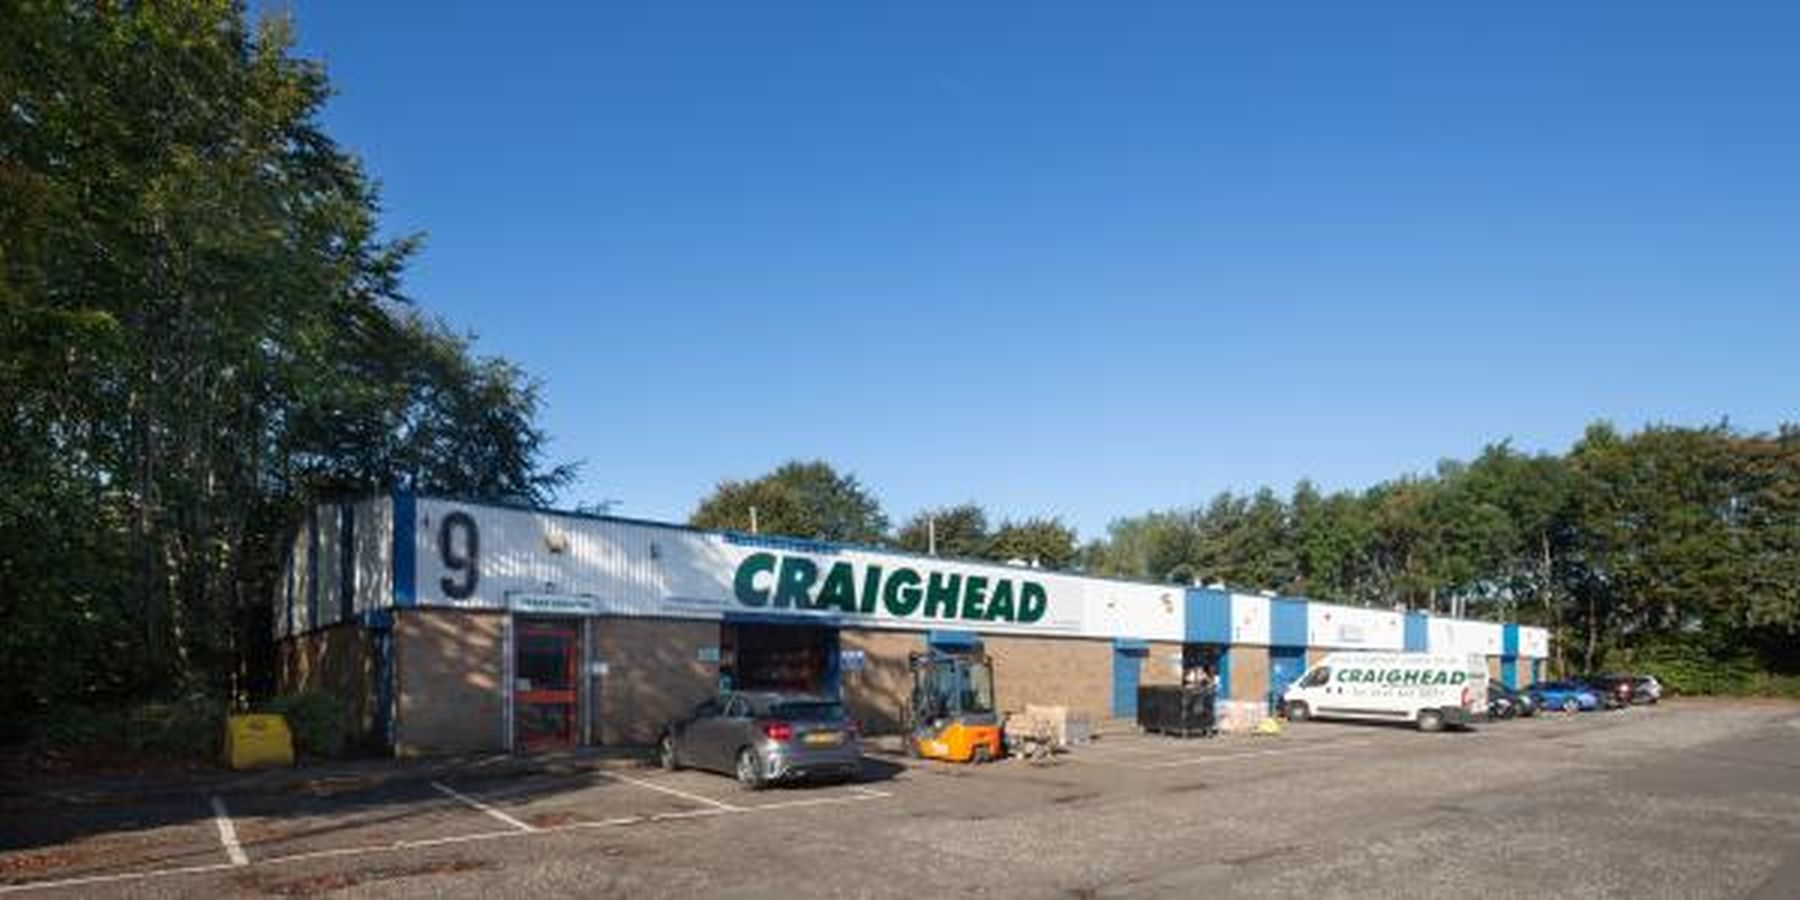 Ryden completes the sale of multi-let industrial investment in Cambuslang, Glasgow for £1.125m Image